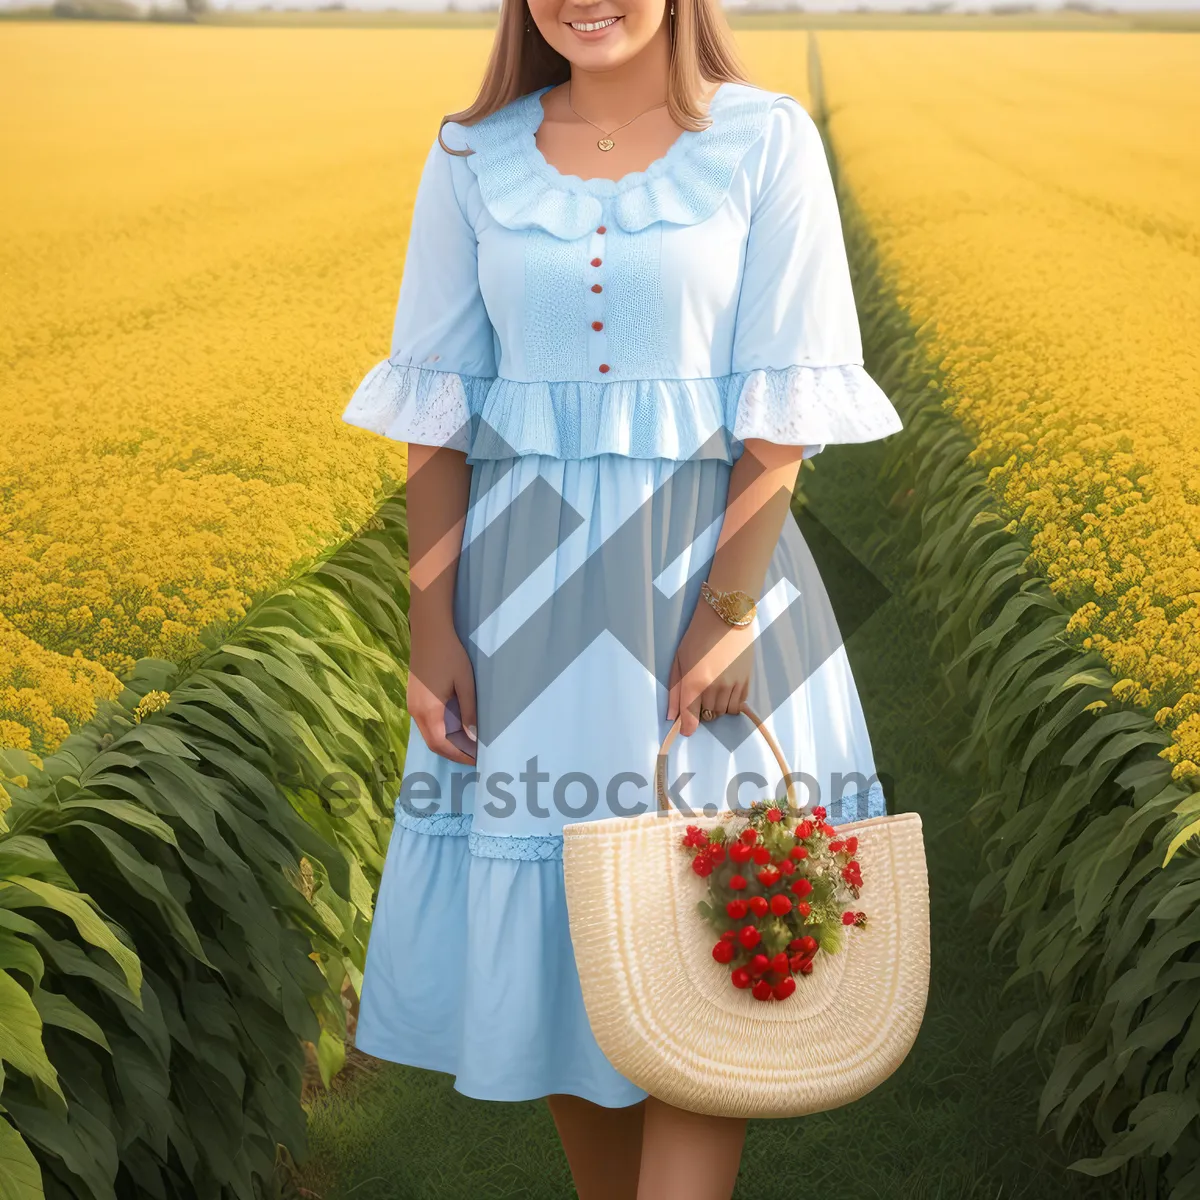 Picture of Happy Smiling Woman in Summer Park